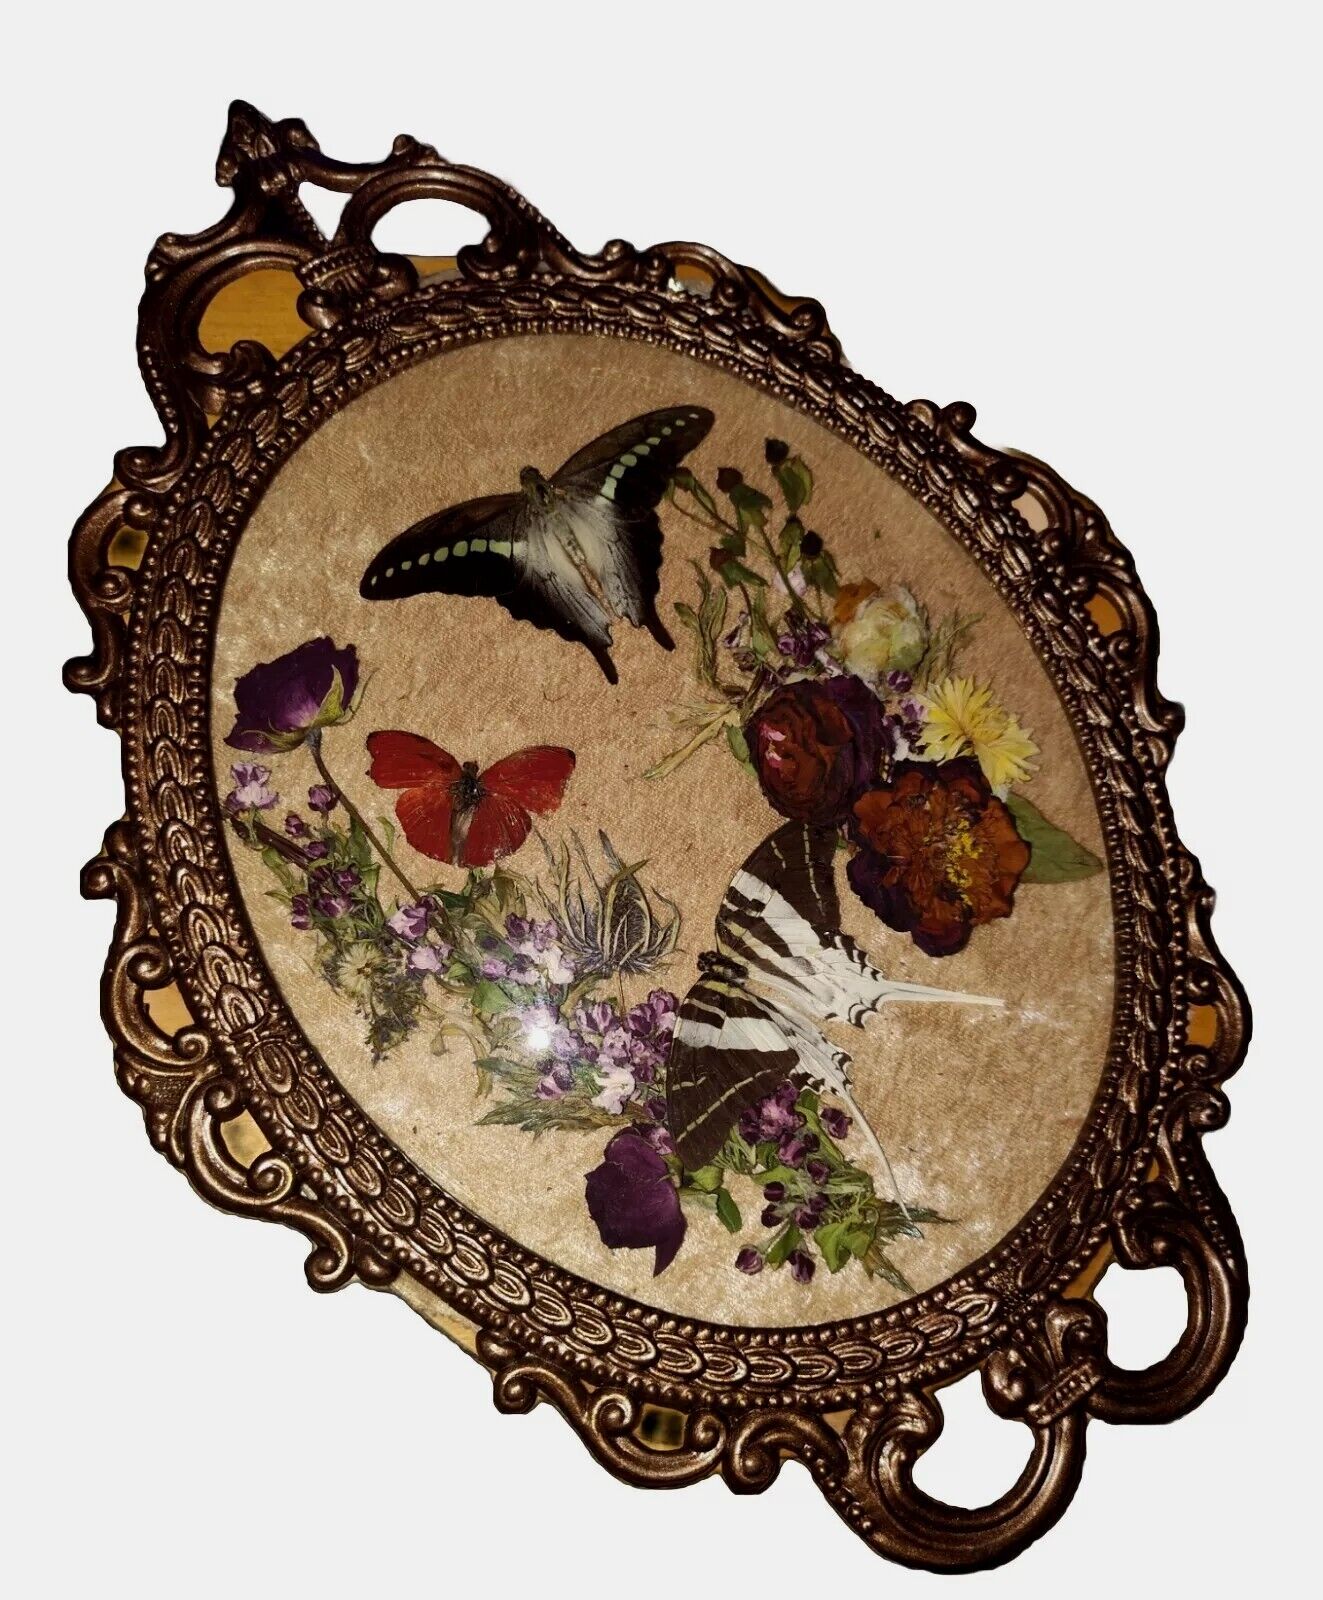 Real Taxidermy W/ Butterflies Ornate Convex Glass Frame Cottagecore Blue Morpro